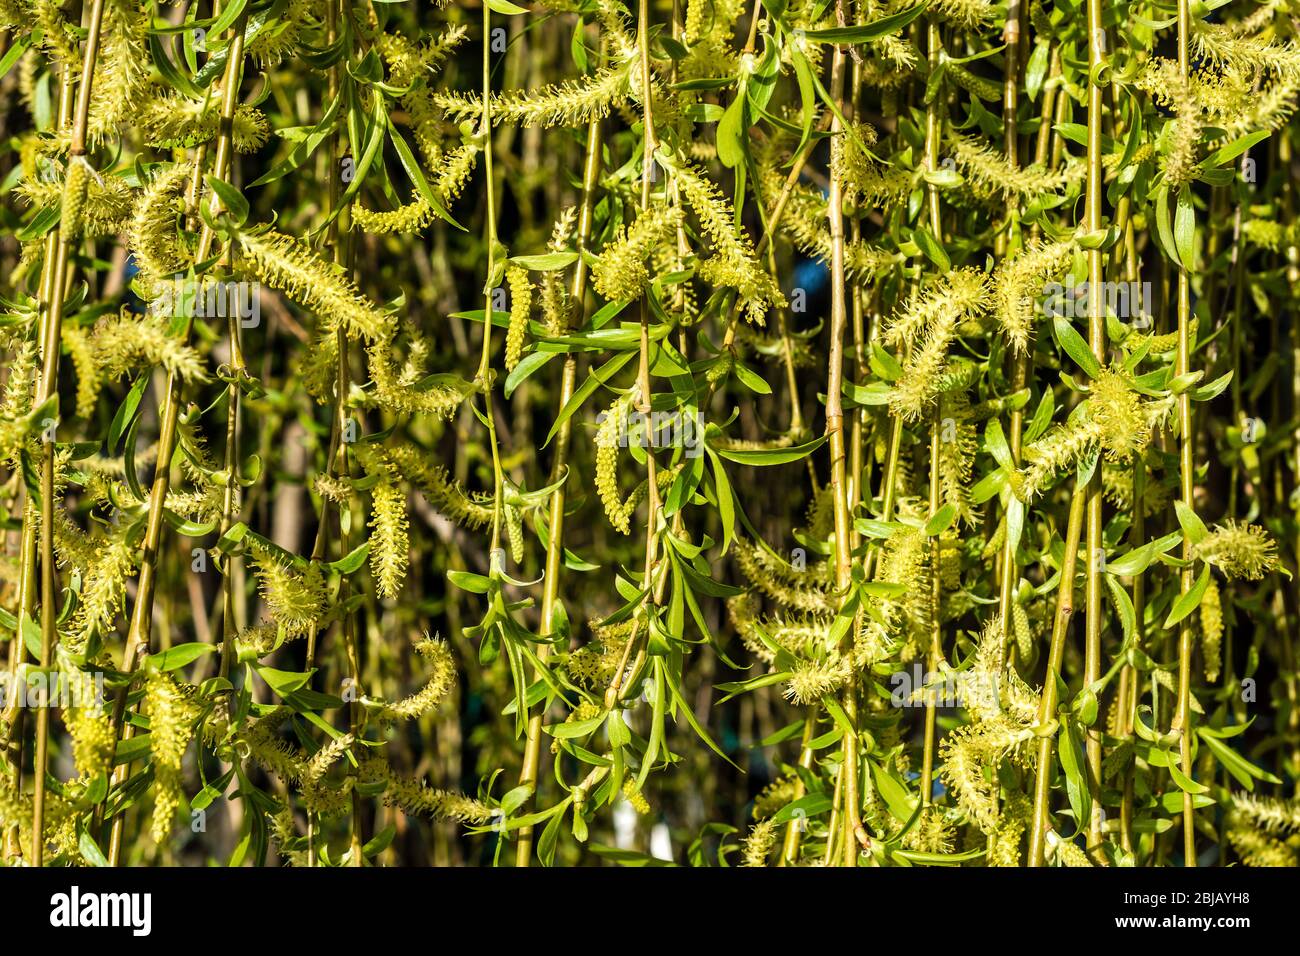 Crack Willow (Salix fragilis) catkins in early spring. Stock Photo